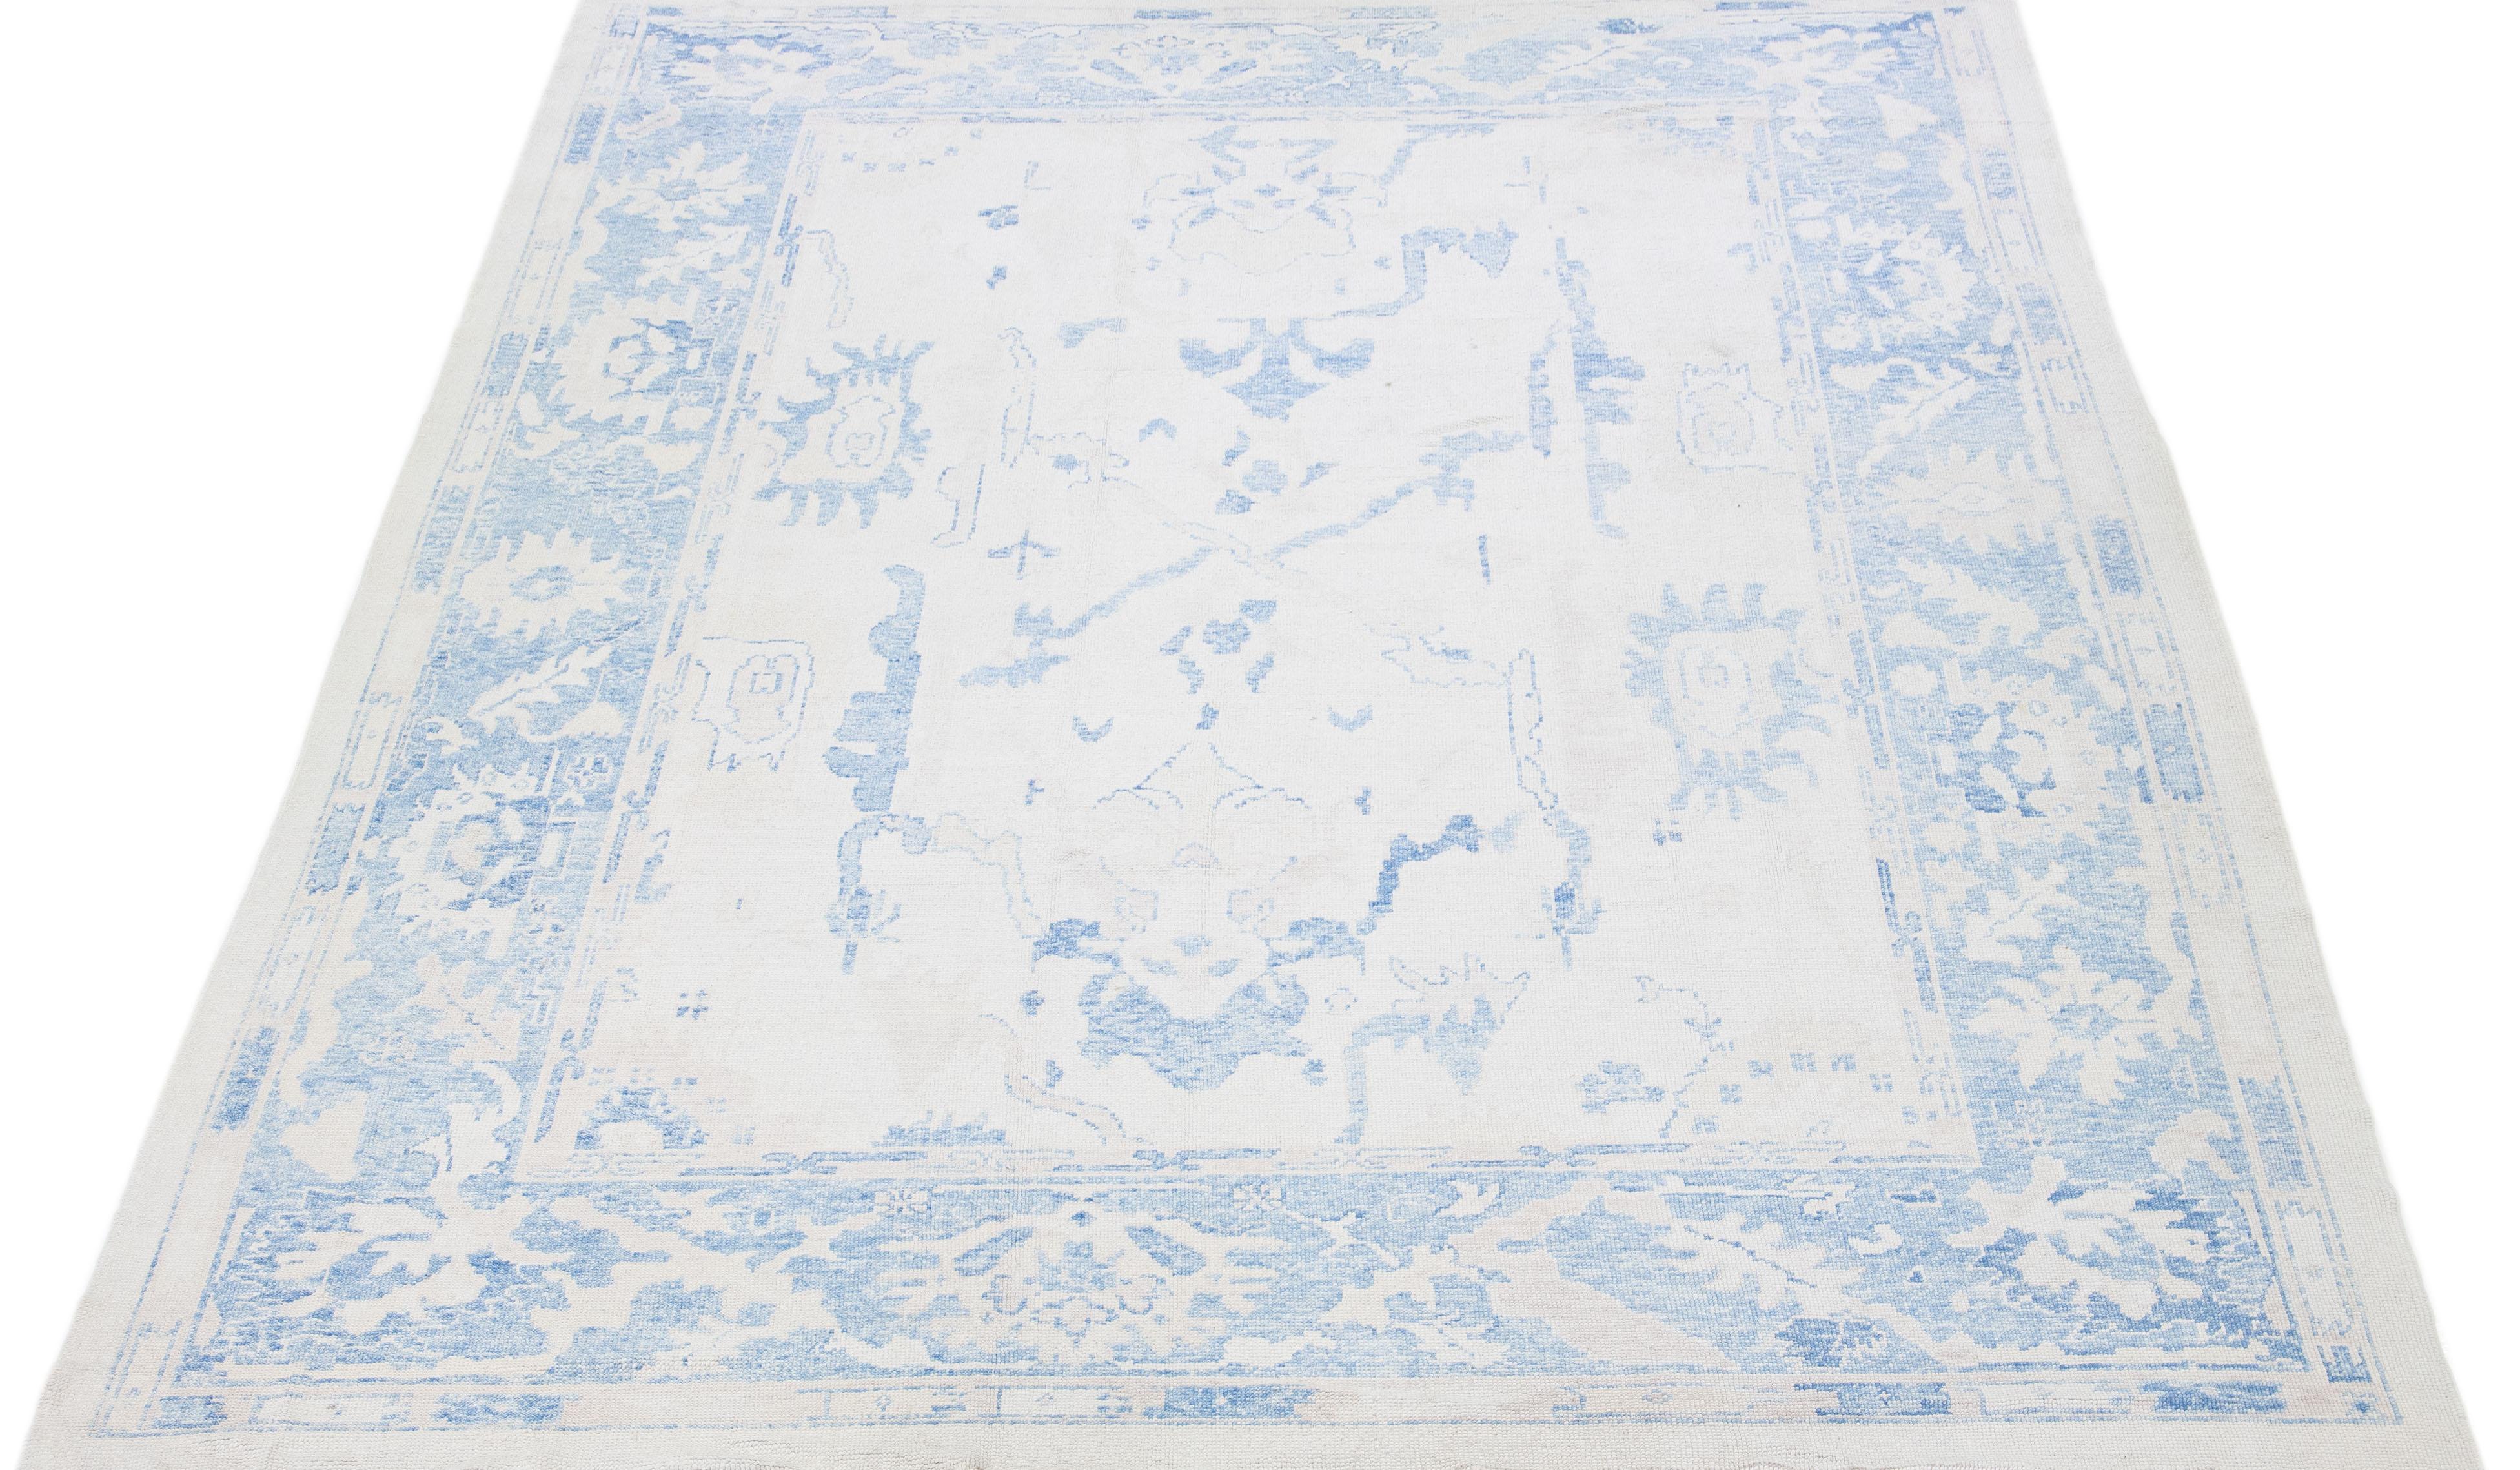 Beautiful modern Oushak hand-knotted wool rug with a beige color field. This Turkish Piece has blue accent colors in a gorgeous all-over floral design.

This rug measures: 10'3